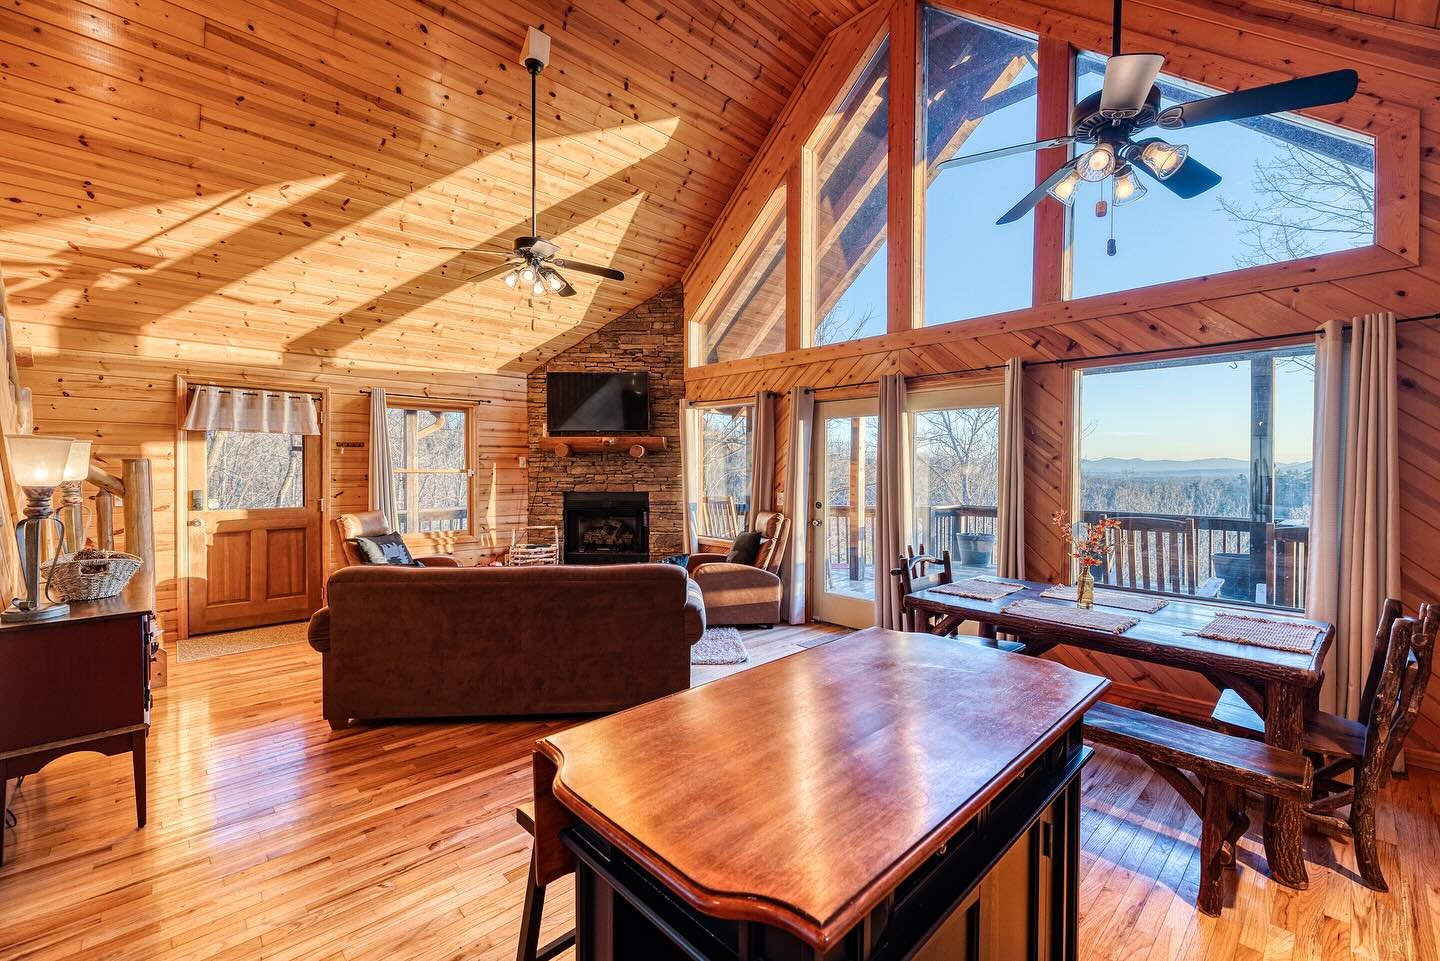 The Great Escape is truly just that! She is everything you need &amp; more, perfectly perched on the mountaintop in Murphy, North Carolina. Blue Ridge is roughly half an hour from the cabin. Guests will find ample outdoor activities, casinos, breweri